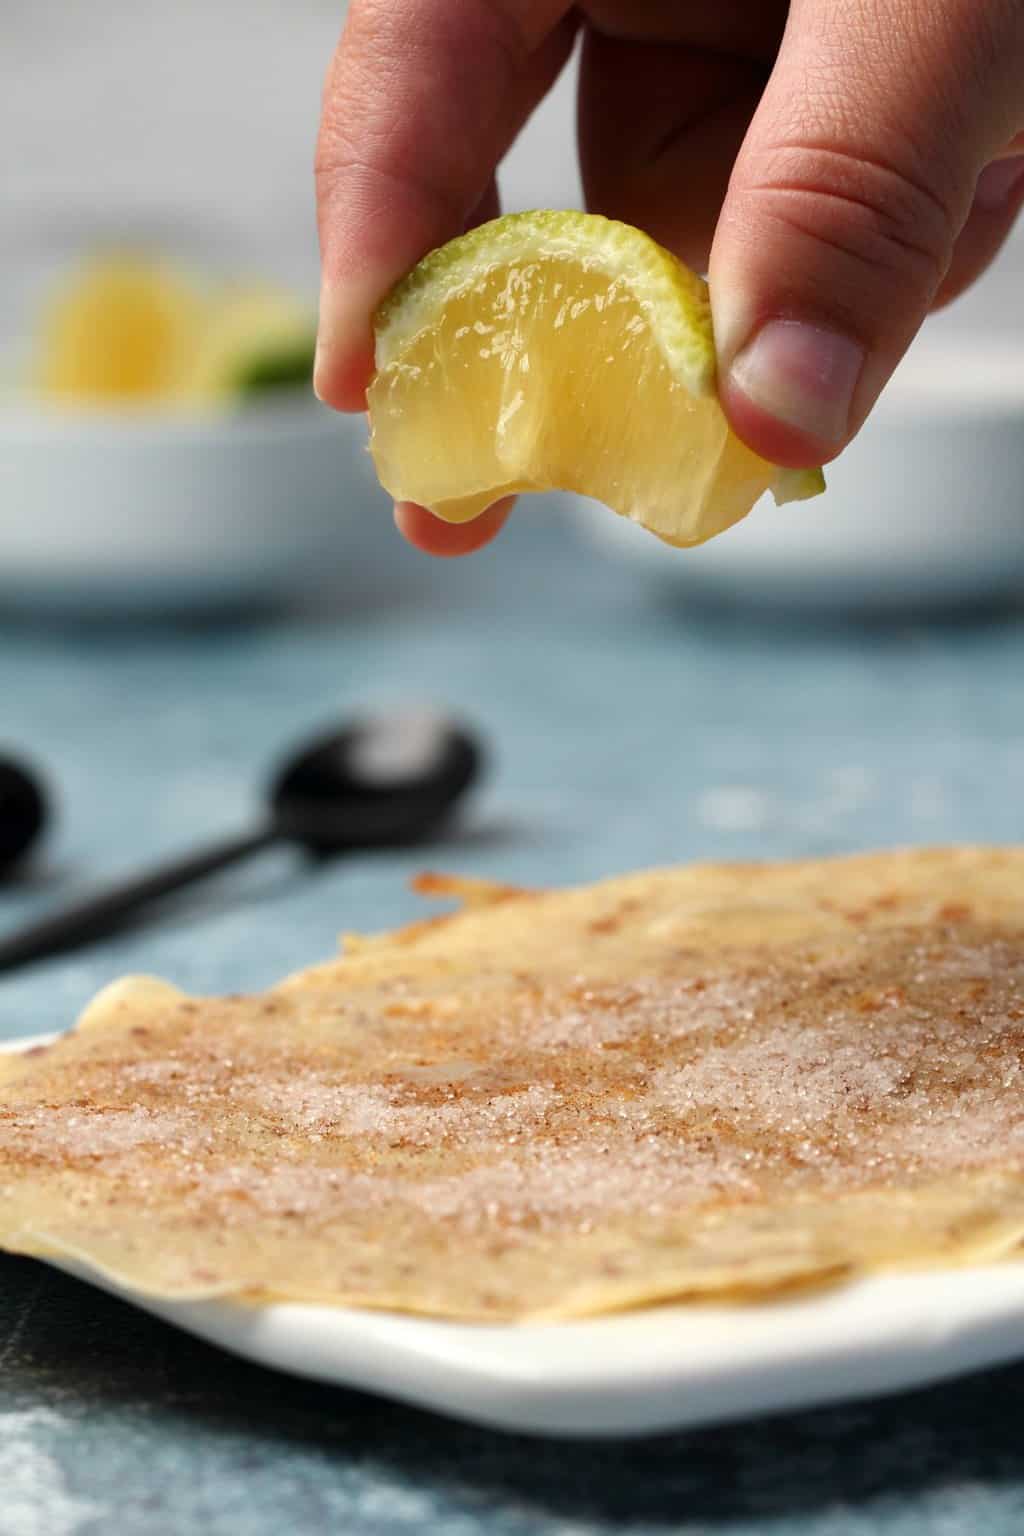 A wedge of lemon being squeezed onto a cinnamon sugar covered vegan crepe. 